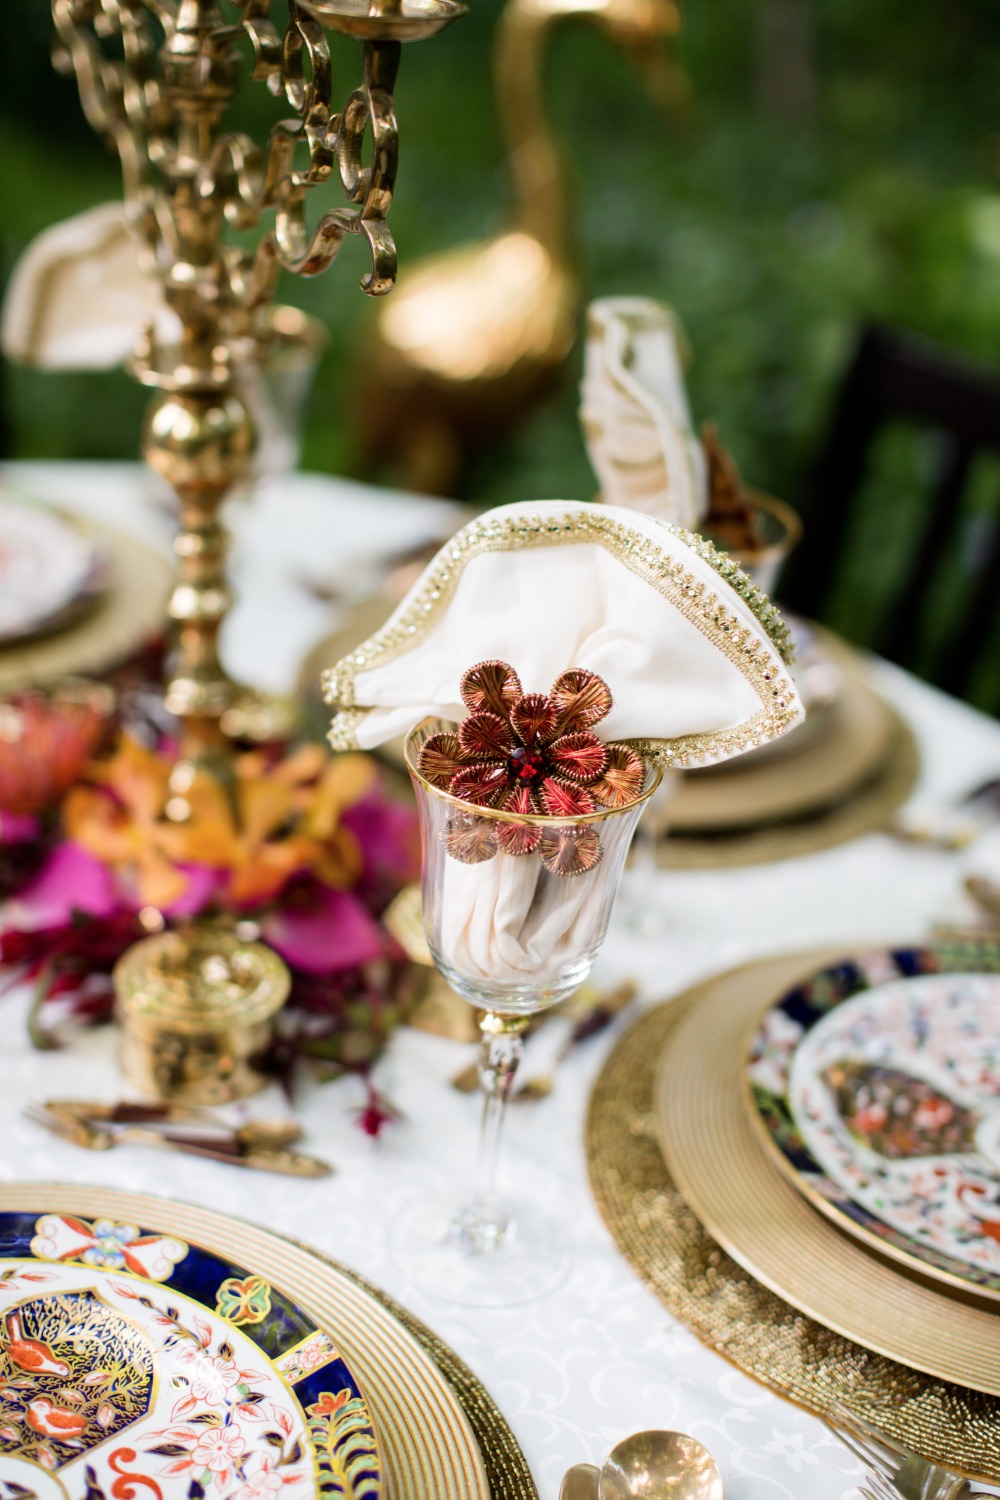 Eclectic place setting ideas